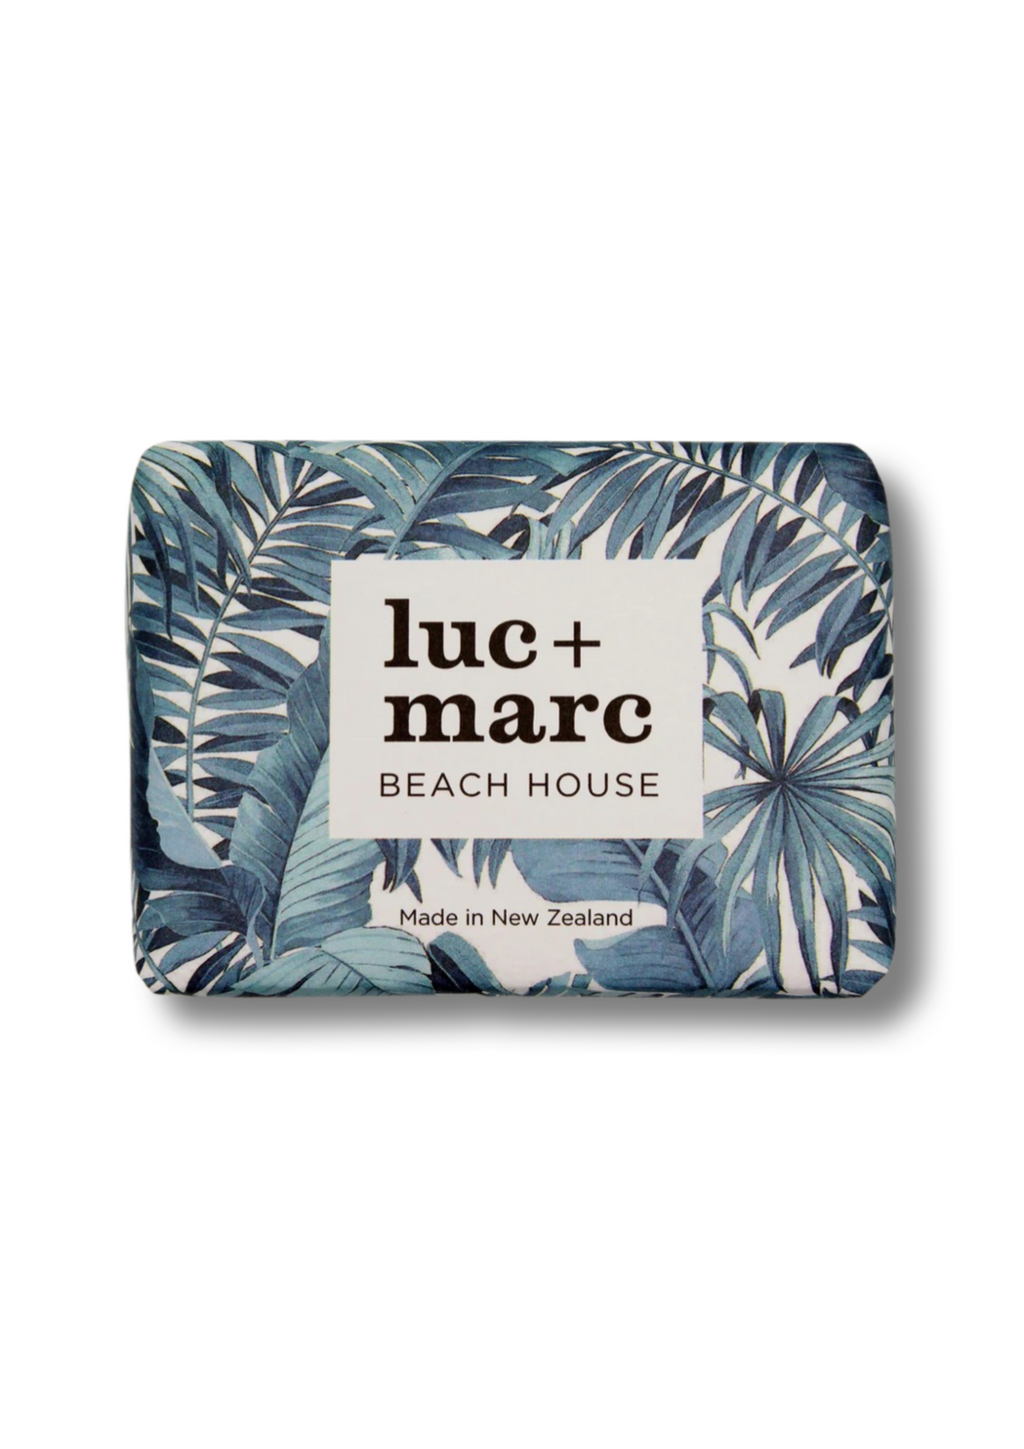 luc + marc 'Beachhouse' Luxury Soap - Gardenia and Aloe Vera Beach House Soap with Gardenia evokes images of a beautiful house at the beach, or an iconic kiwi Bach. Infused with Gardenia, a strong, sweet Spring flower scent, and a favourite soap blend.  luc + marc Beach House Soap uses only the finest ingredients, including an olive oil and coconut oil base, and enhanced with vitamin rich shea butter, that creates a luxurious lather. Moisturing aloe vera helps to reduce skin inflammation, & soothe skin.